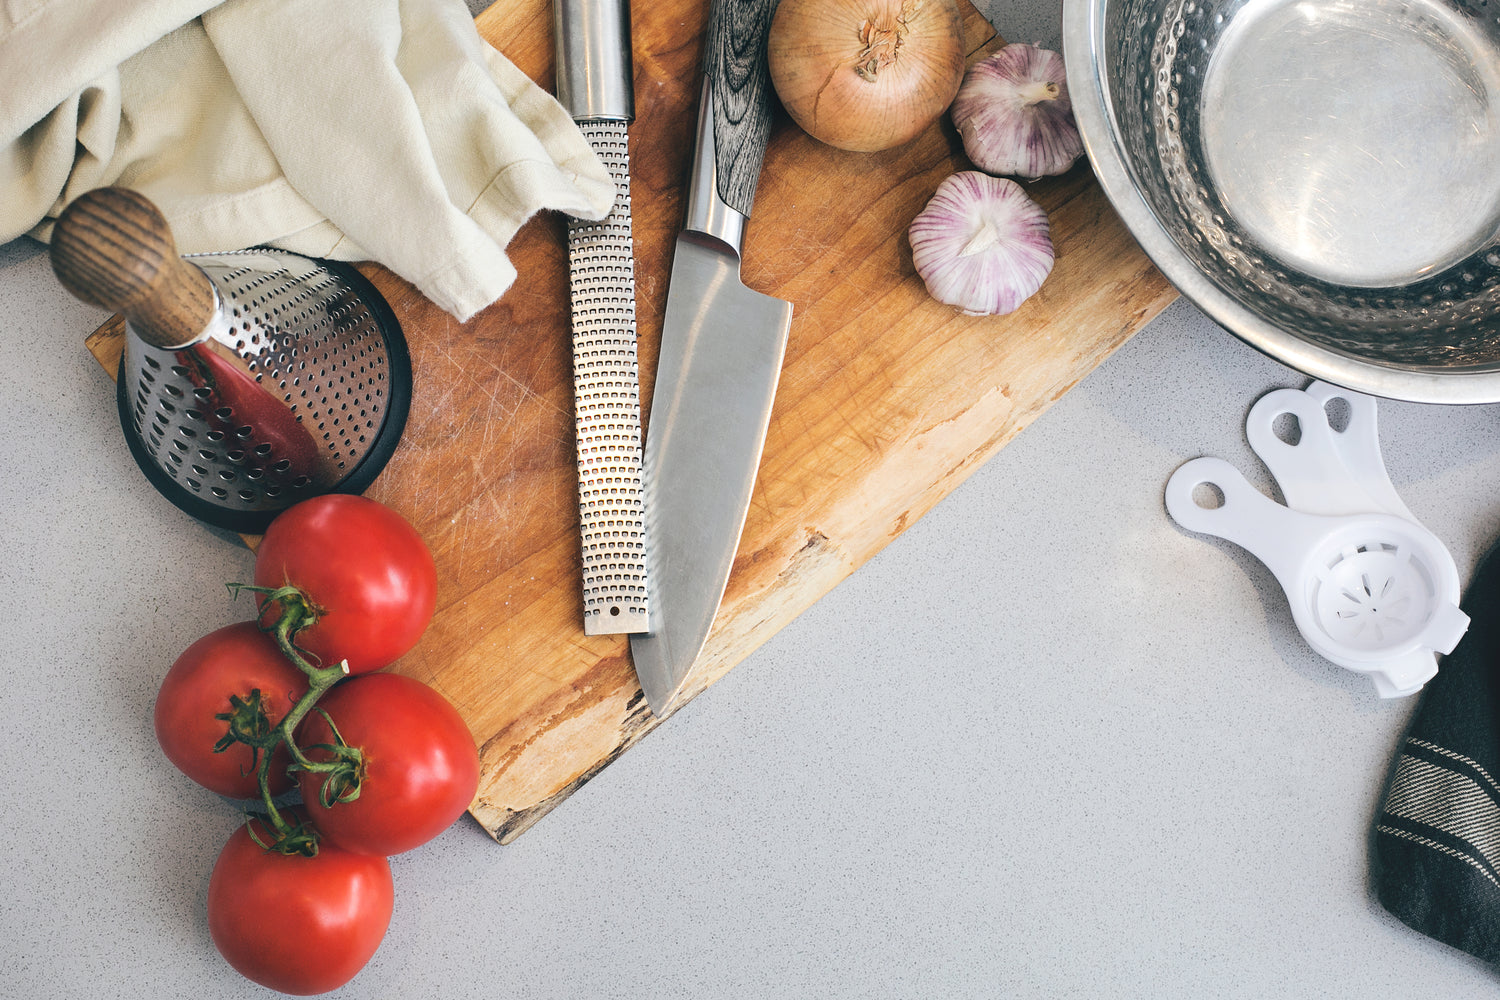 MOSFiATA 8 Super Sharp Professional Chef's Knife, Why Choose The MOSFiATA  8-inch Chef Knife? MOSFiATA knives are made of high-quality German  stainless steel, which resists rust, corrosion, and, By MOSFiATAOnline